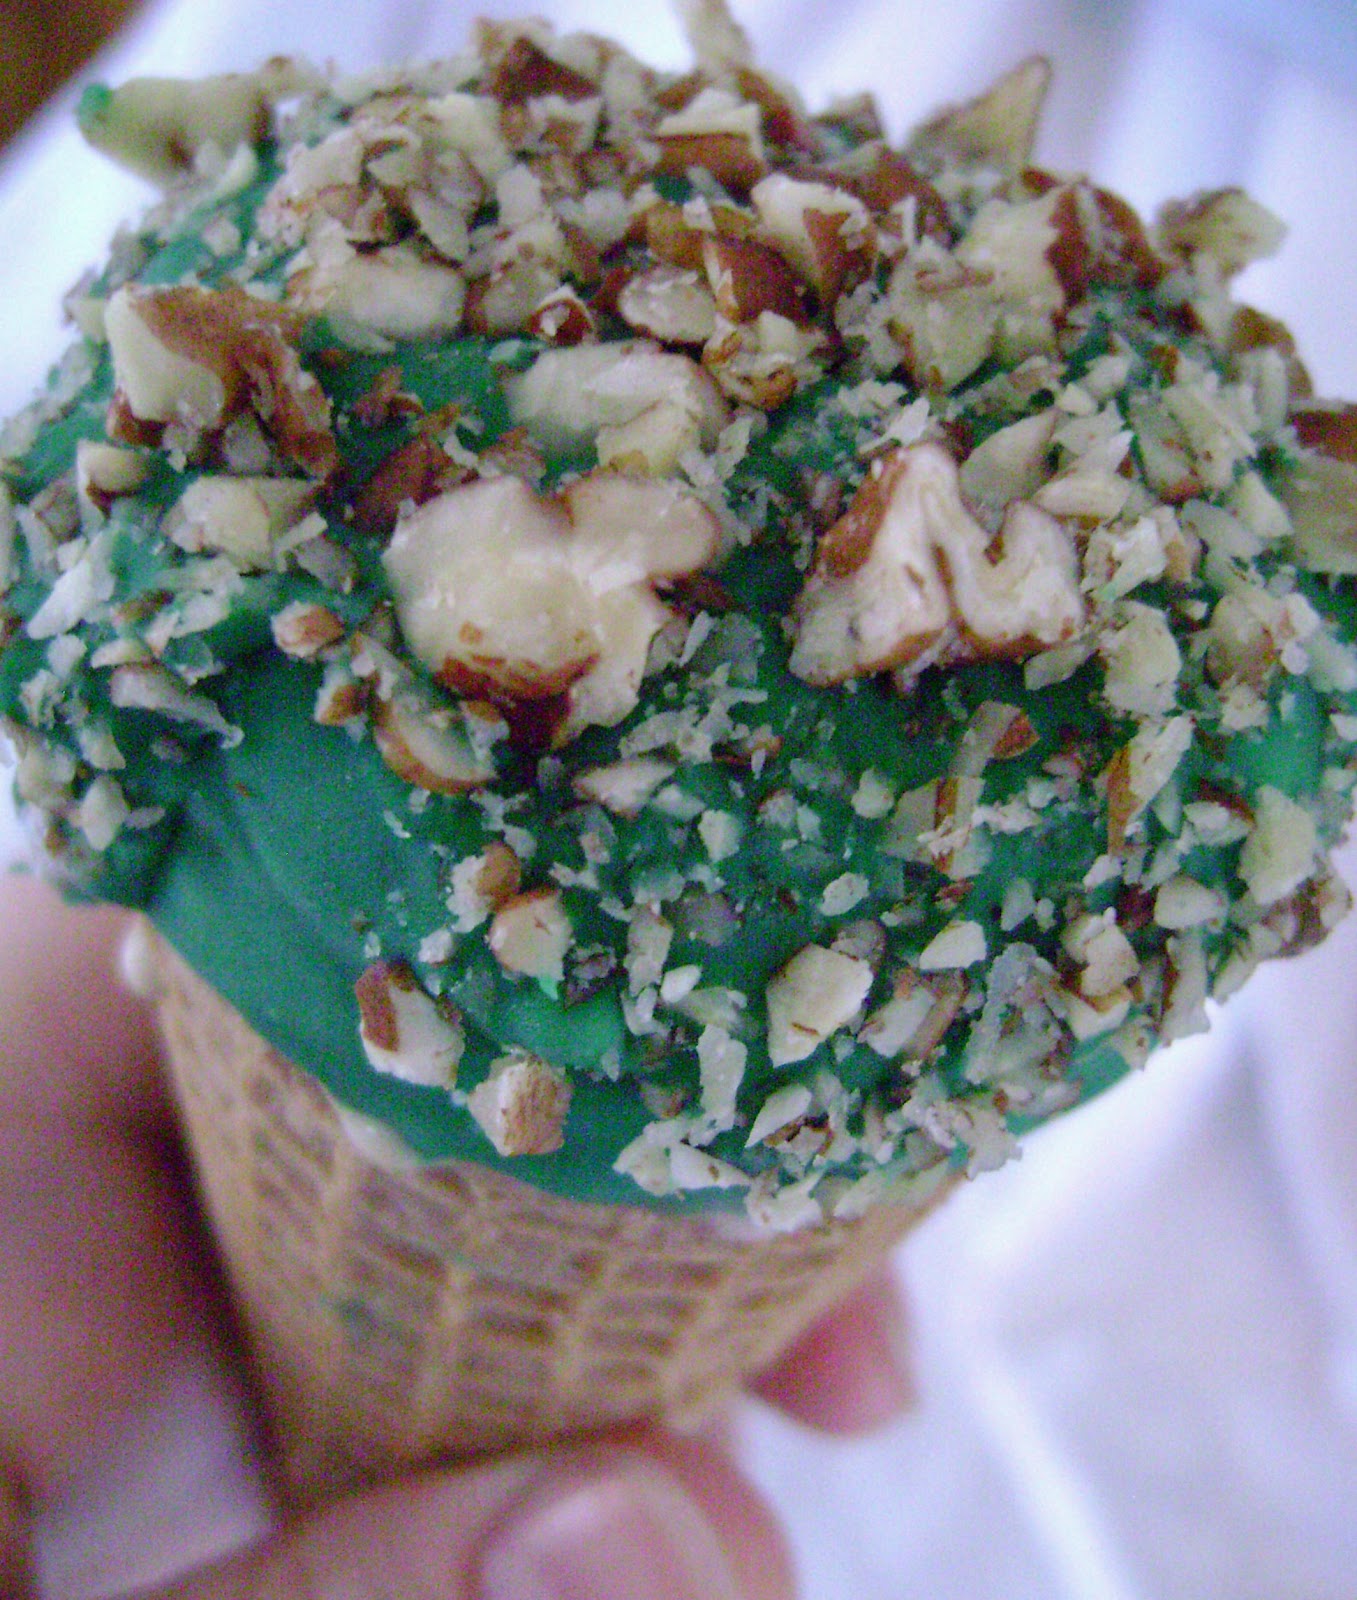 Jo and Sue Bailey's Ice Cream and Homemade Drumsticks for St. Patrick